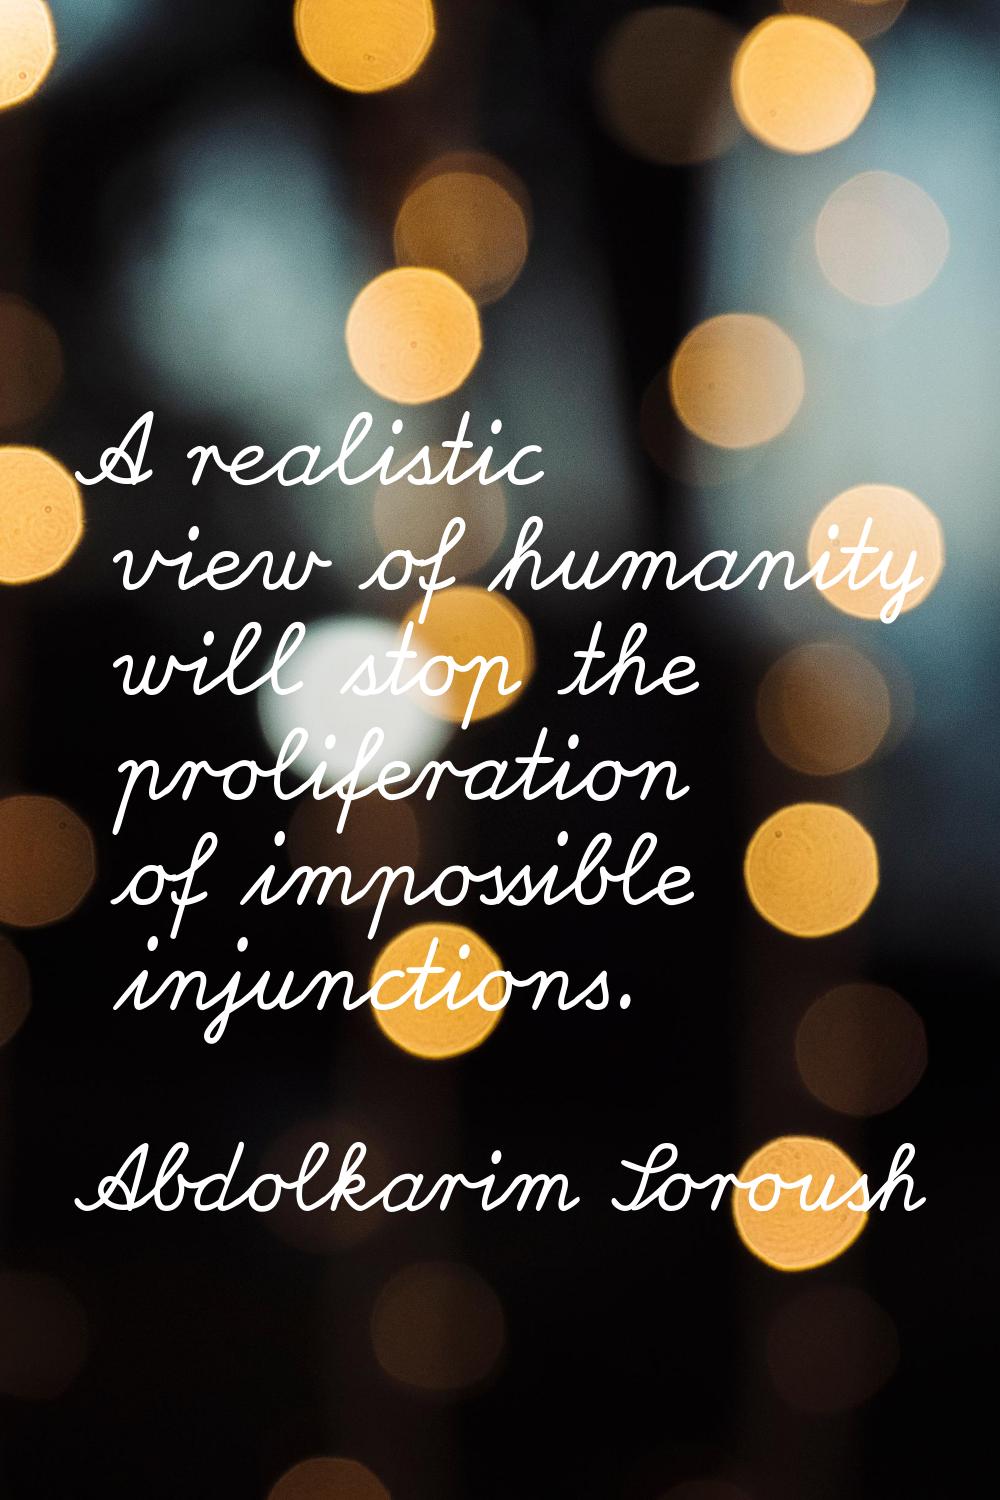 A realistic view of humanity will stop the proliferation of impossible injunctions.